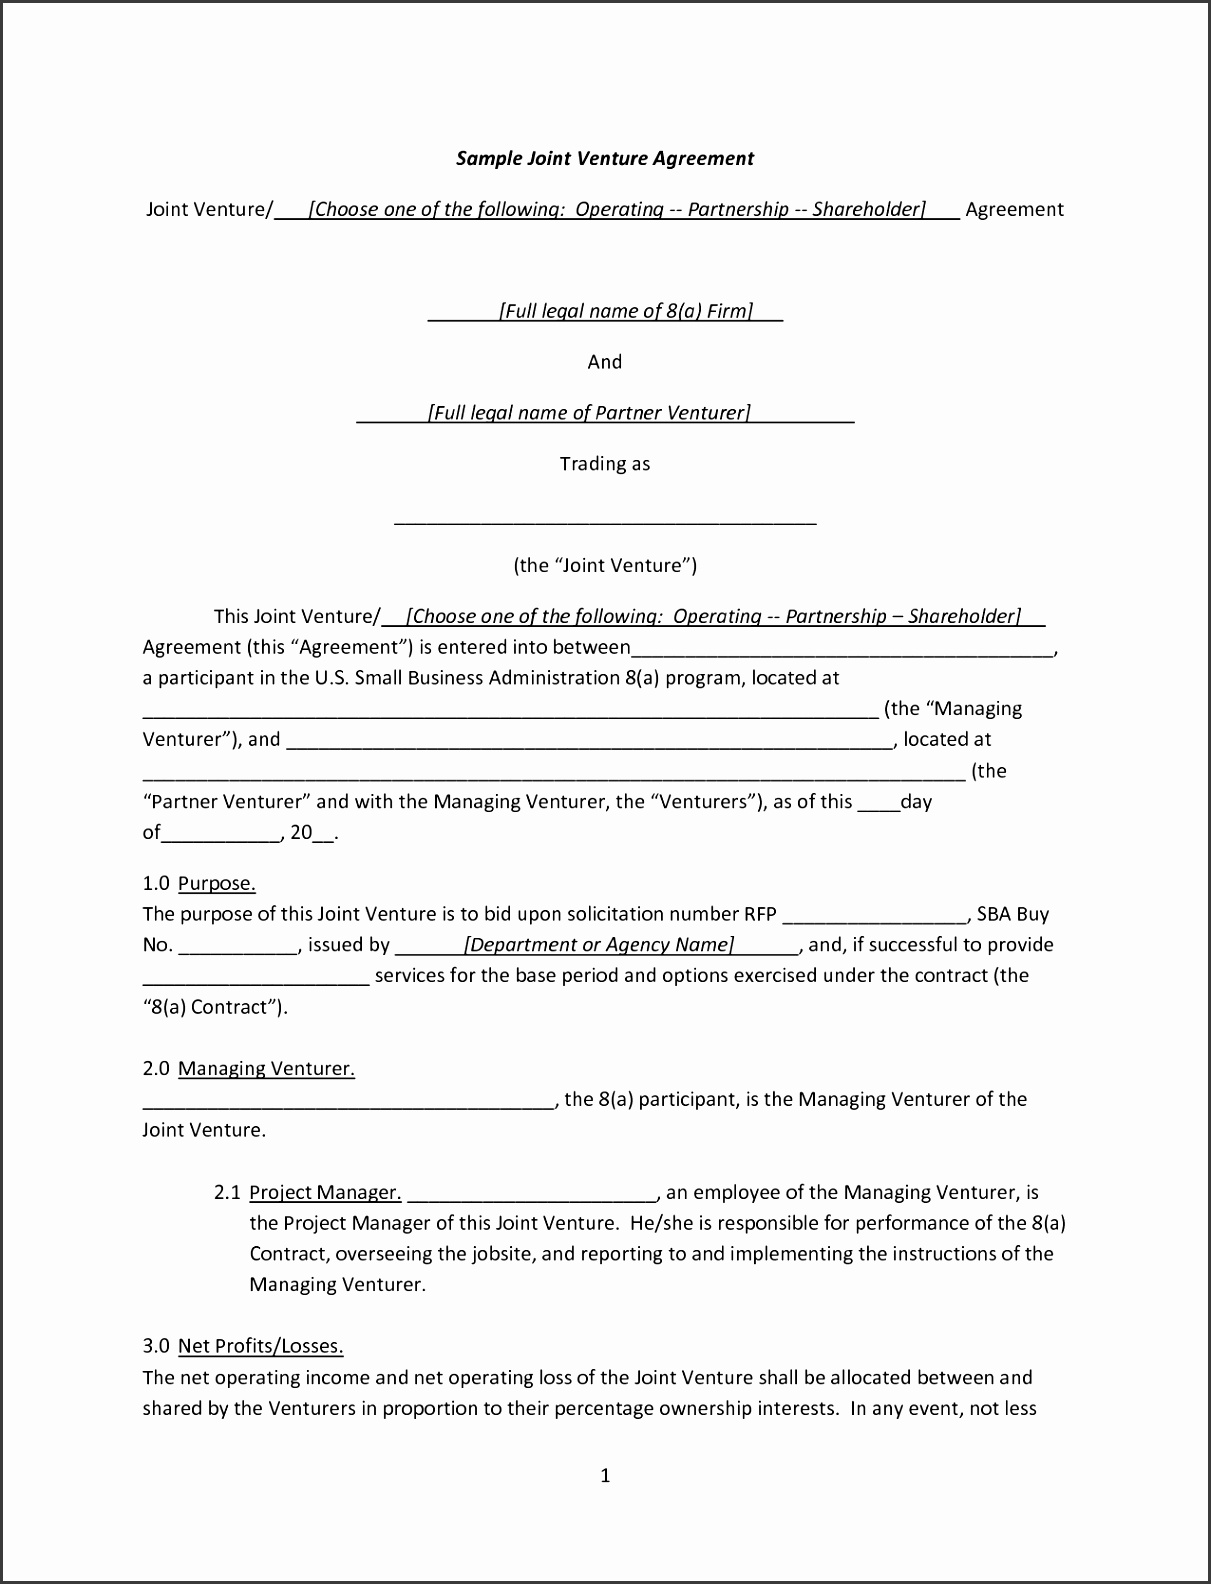 Sample Joint Venture Agreement Template